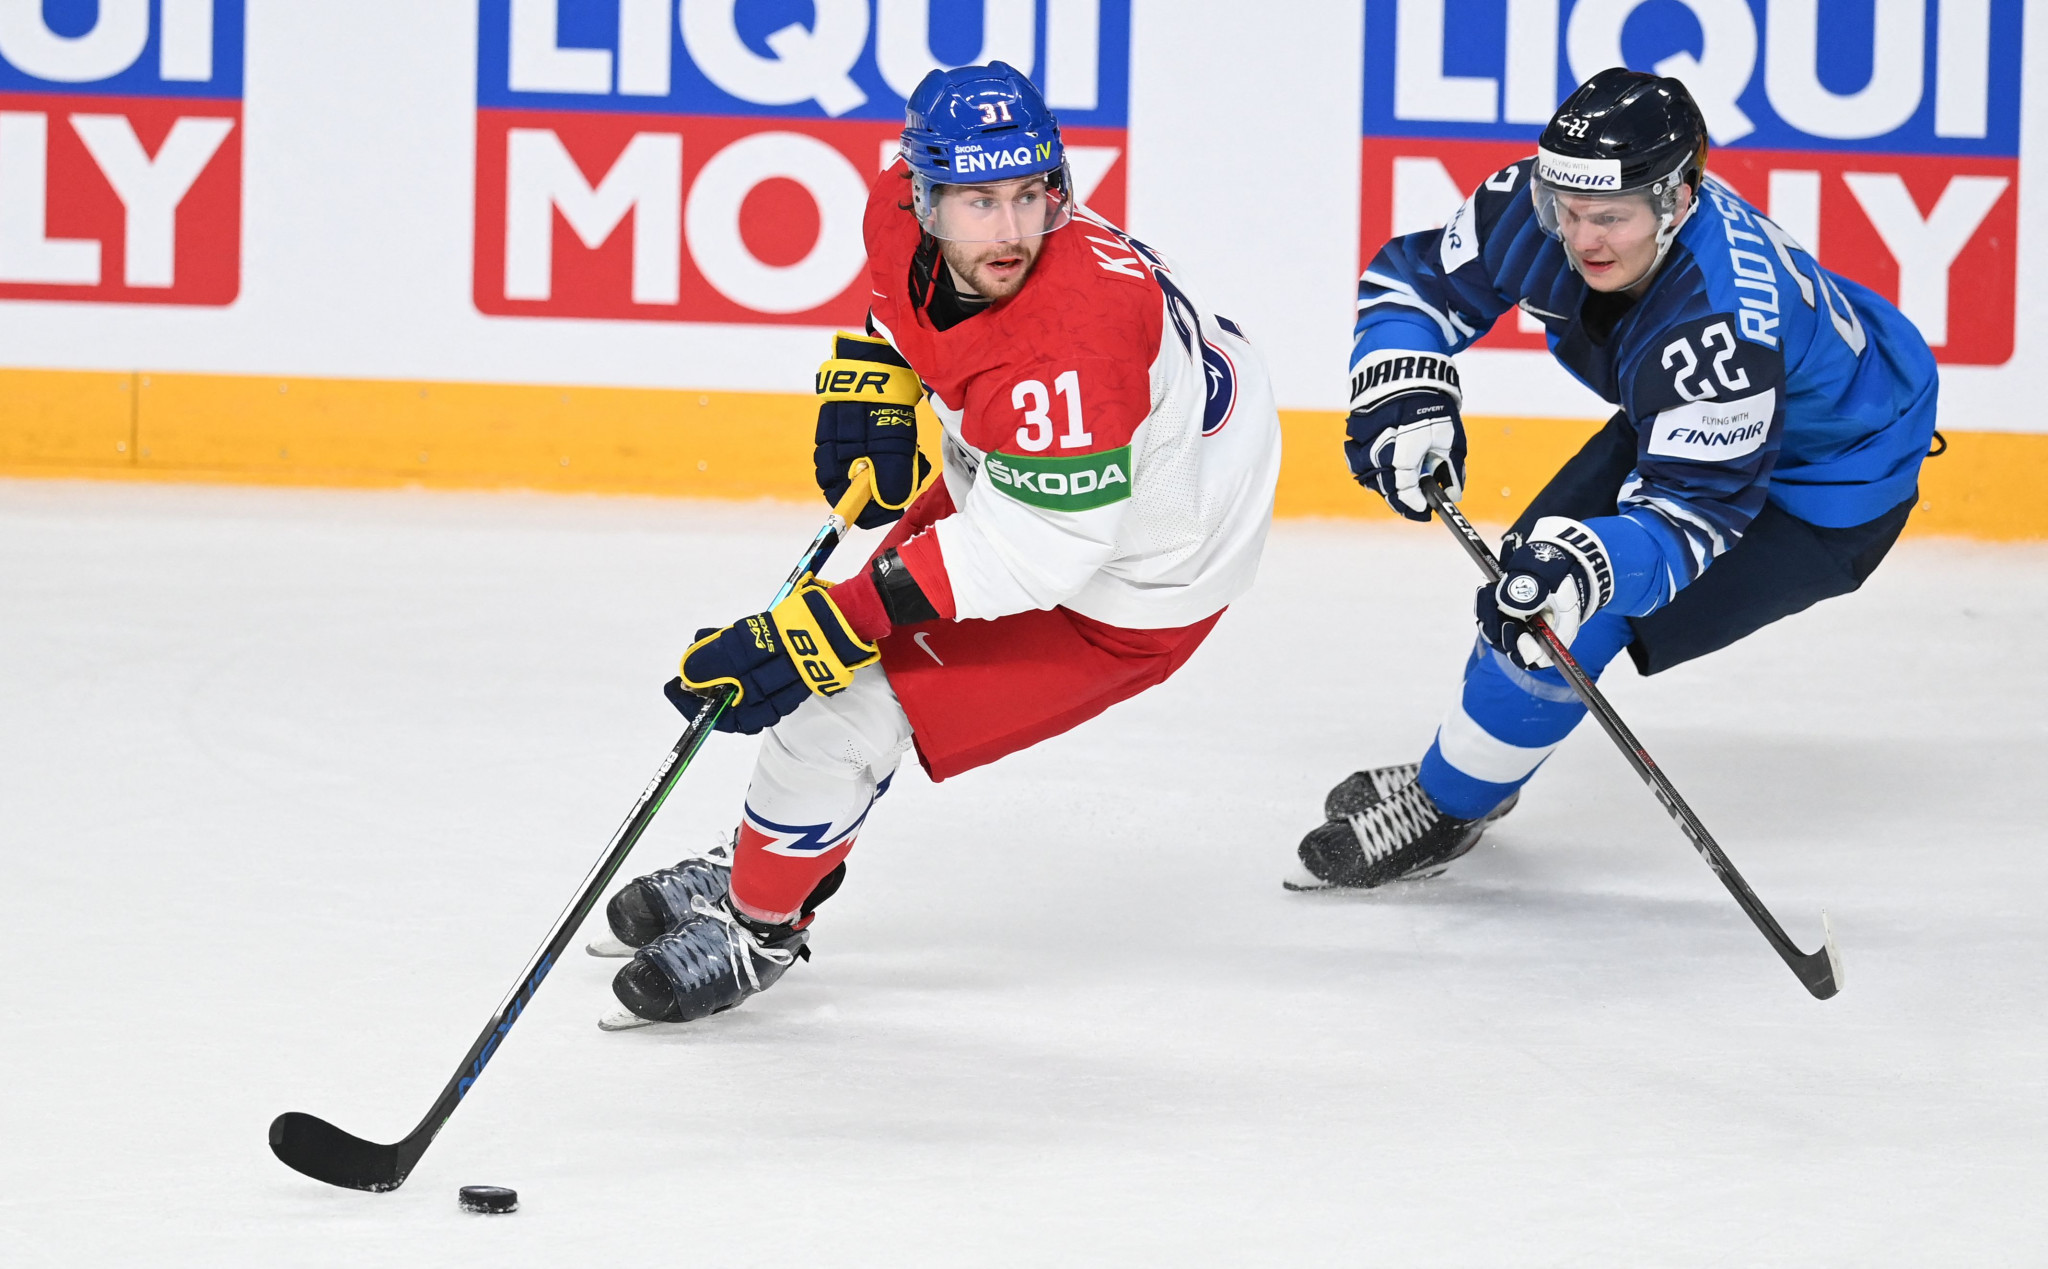 Germany victorious in shoot-out as defending champions Finland edge through in IIHF World Championship semi-finals